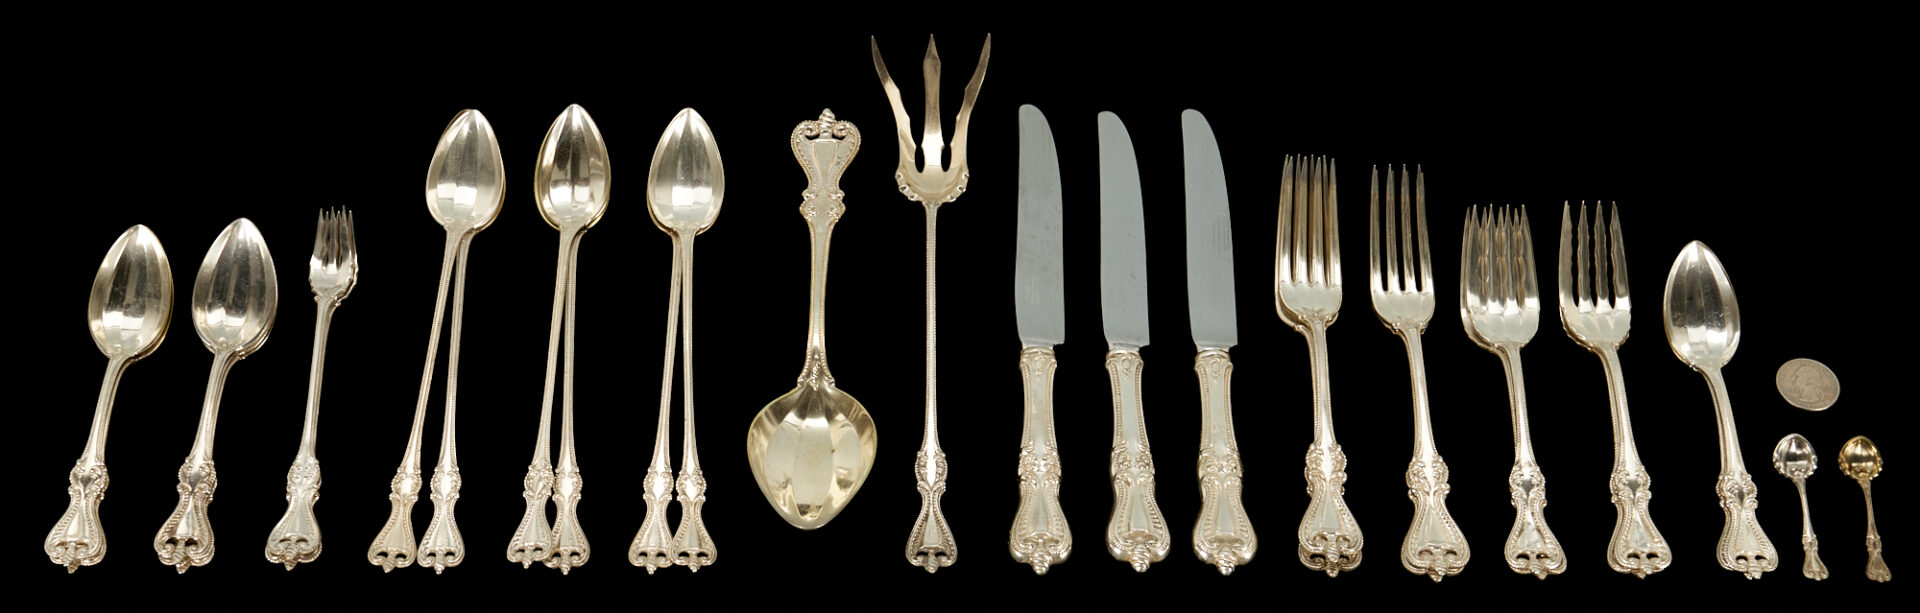 Lot 446: 30 pcs. Towle Old Colonial Sterling Silver Flatware